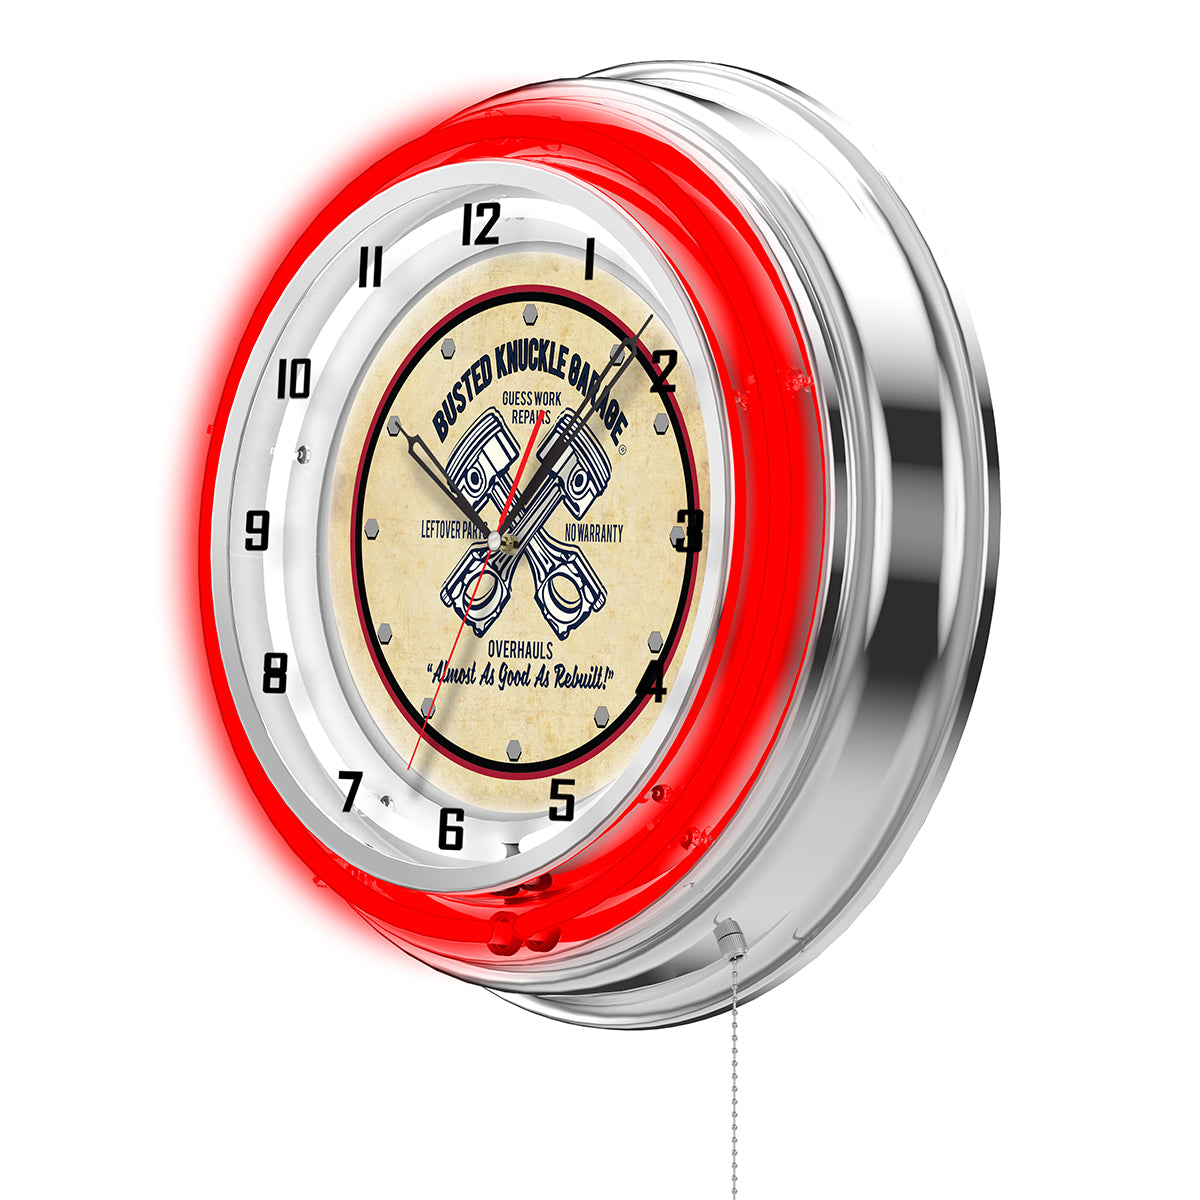 Busted Knuckle Garage Crossed Pistons Shop Clock - Red Neon